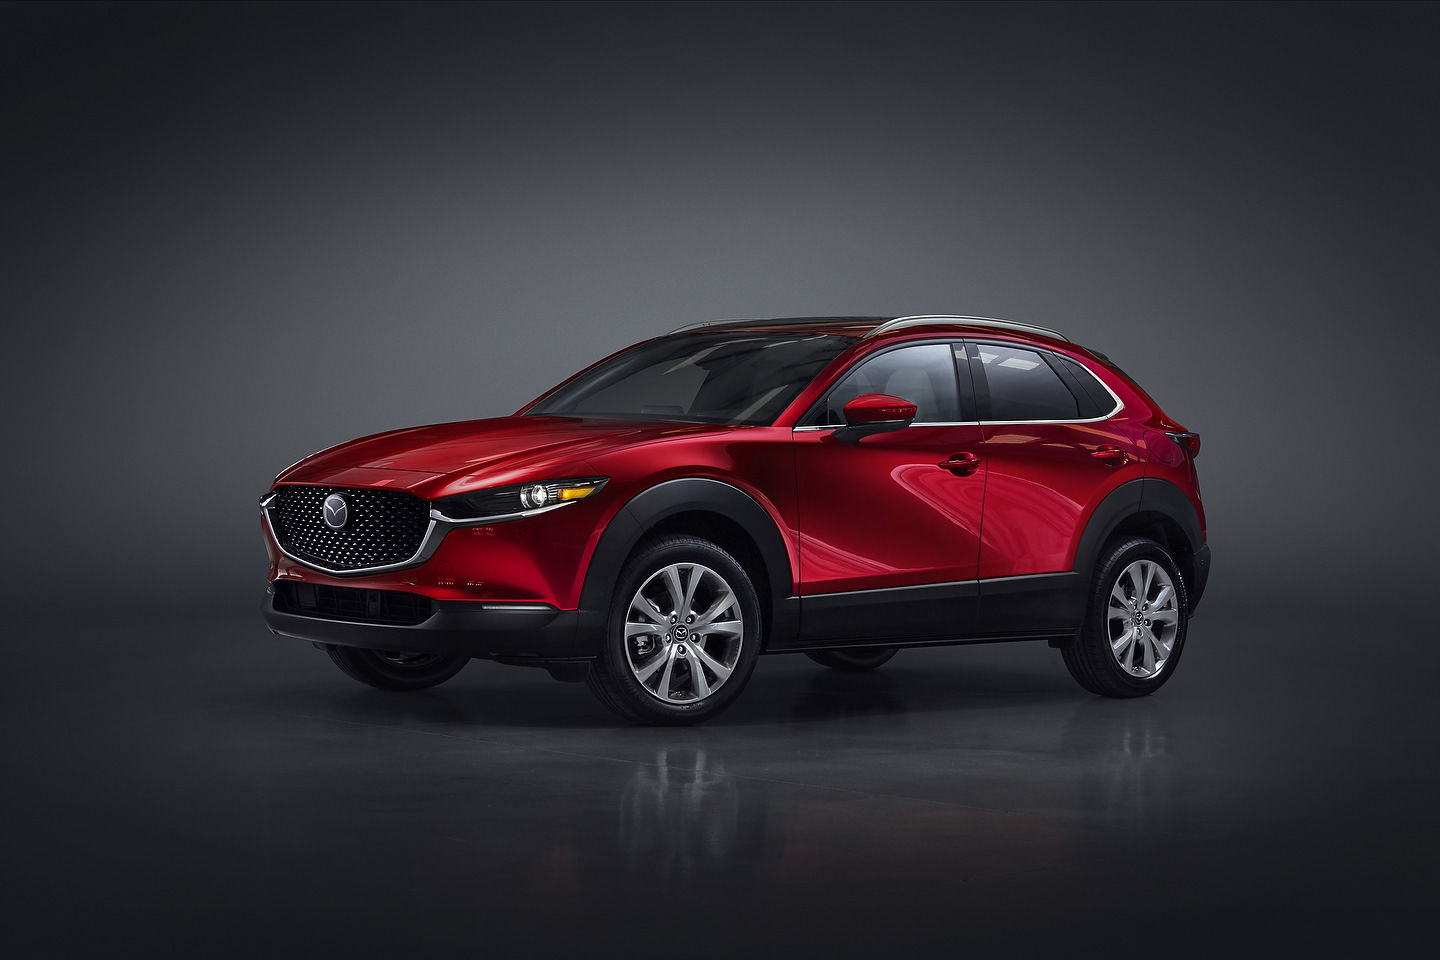 Three Things That Make the 2020 Mazda CX-30 Standout from the Competition